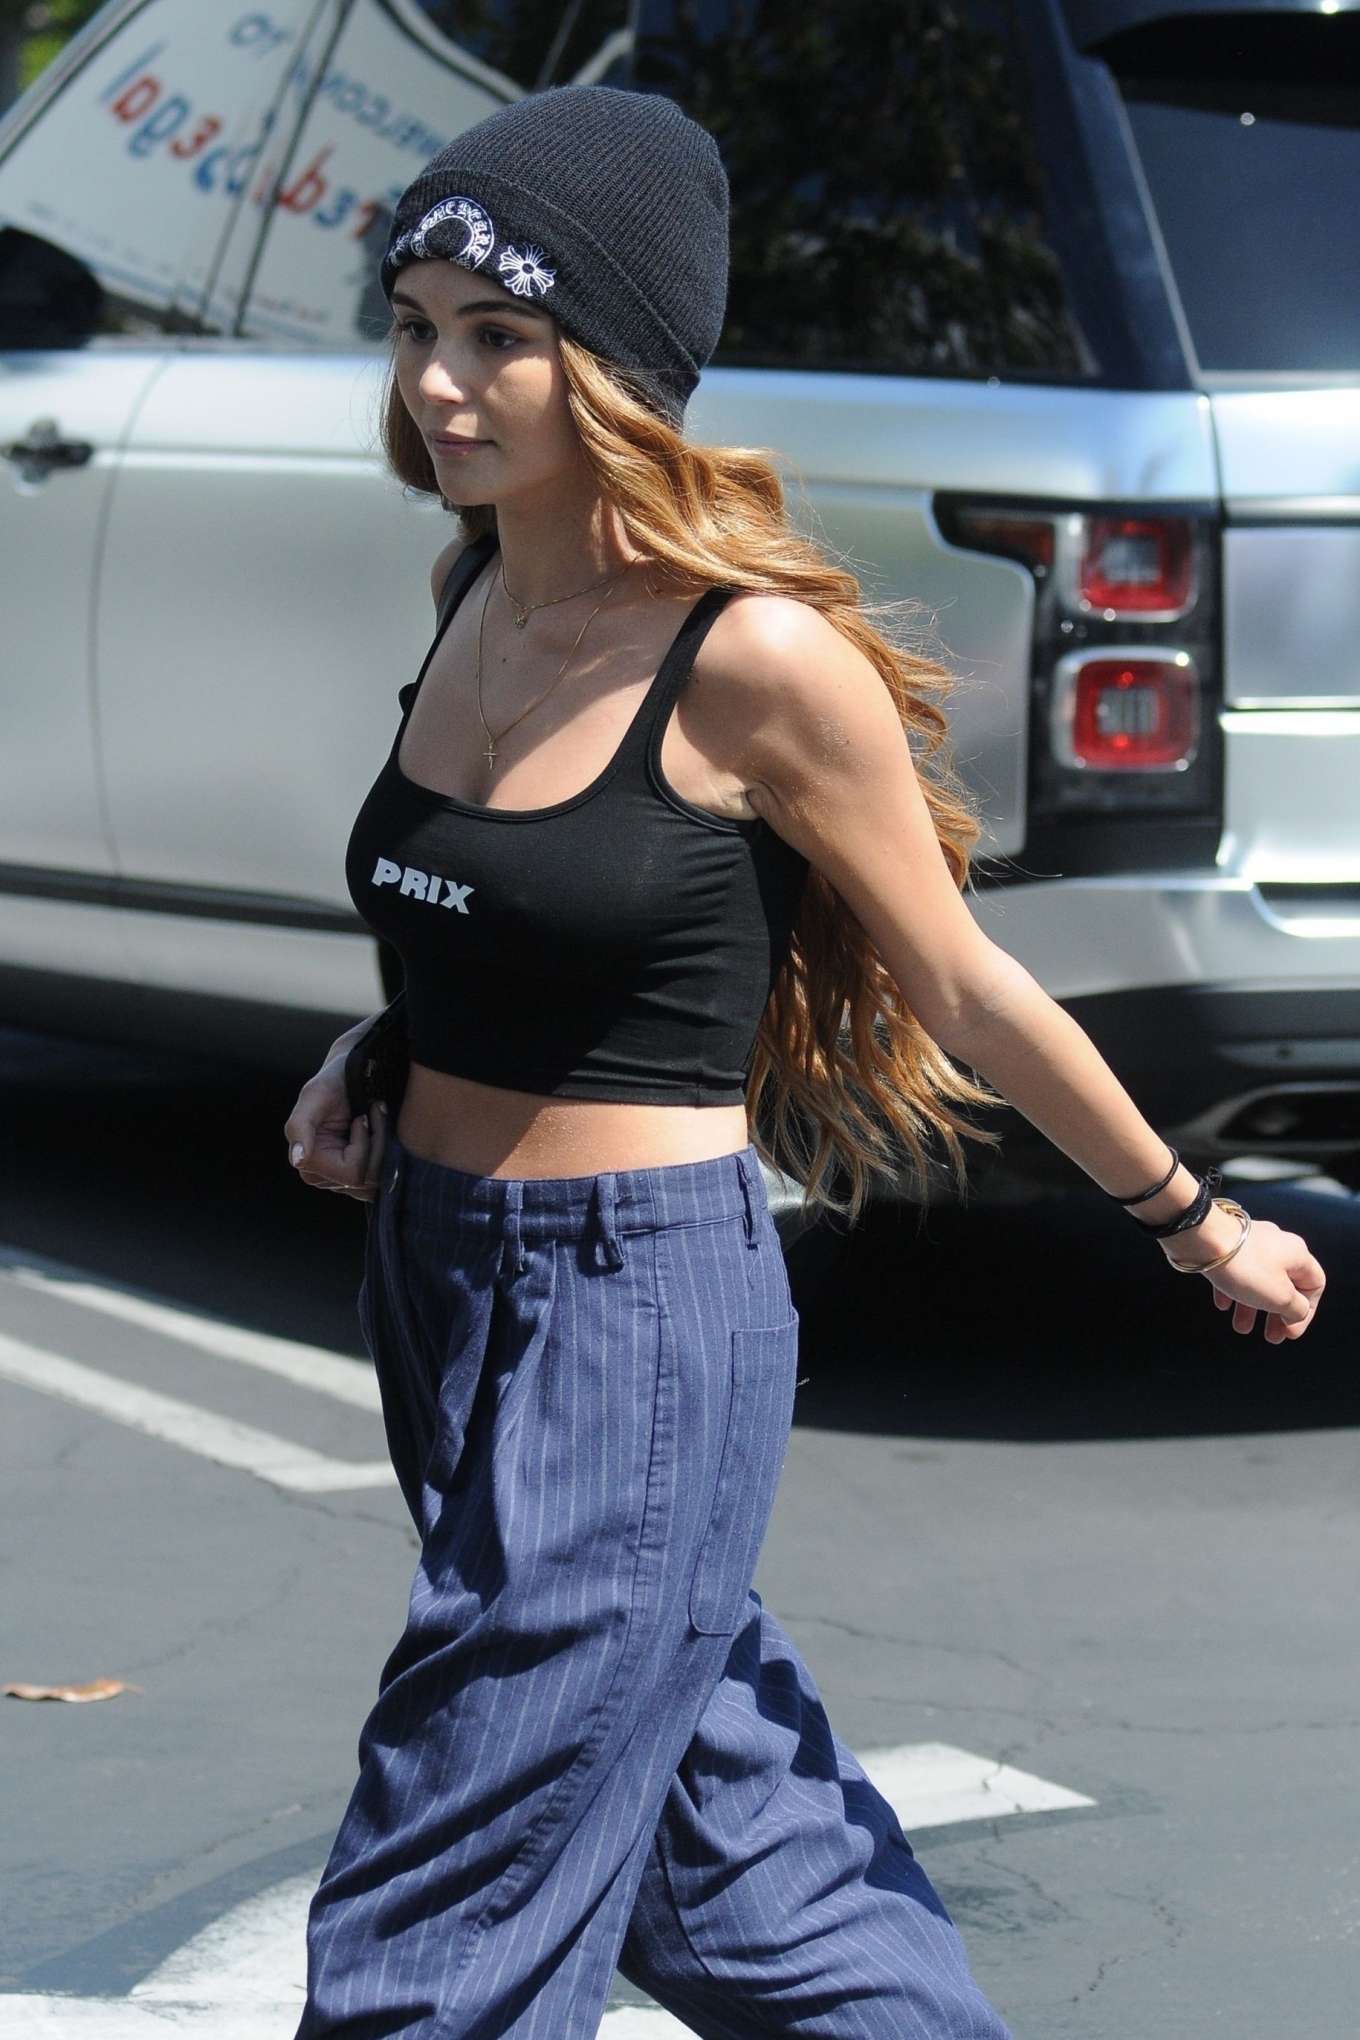 Olivia Jade Giannulli at Fred Segal in West Hollywood. 